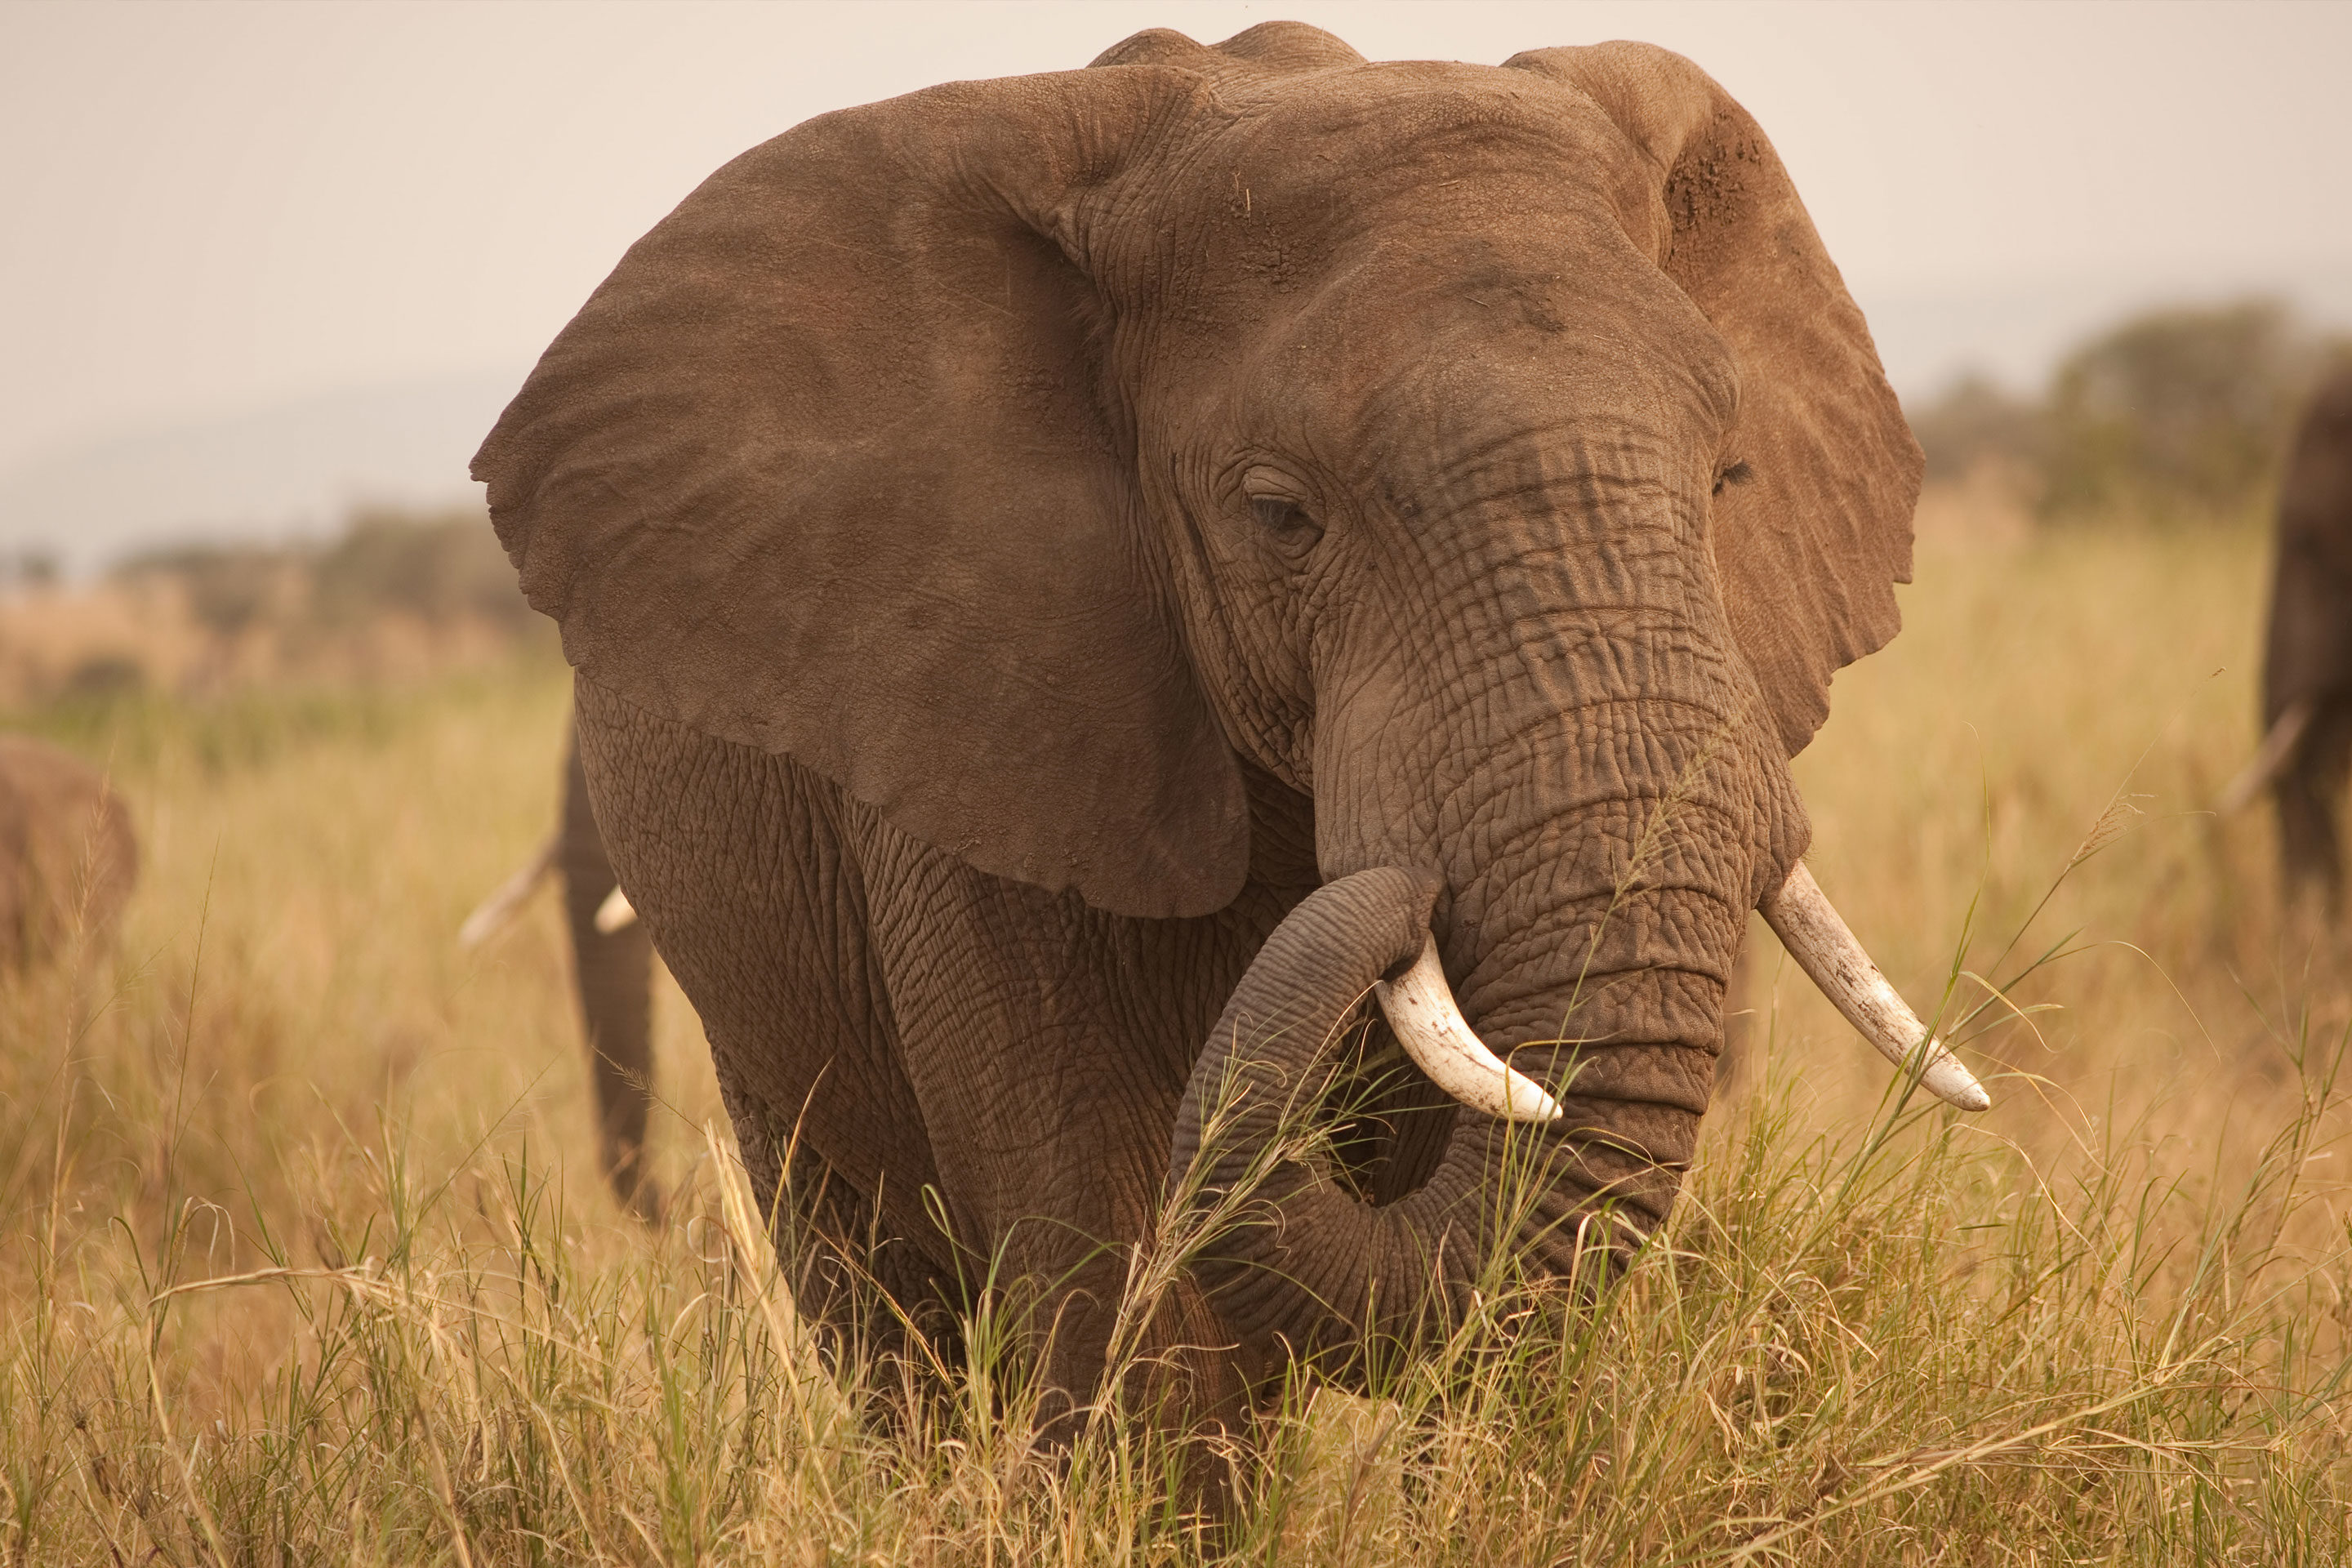 Scientists have discovered why elephants don't get cancer